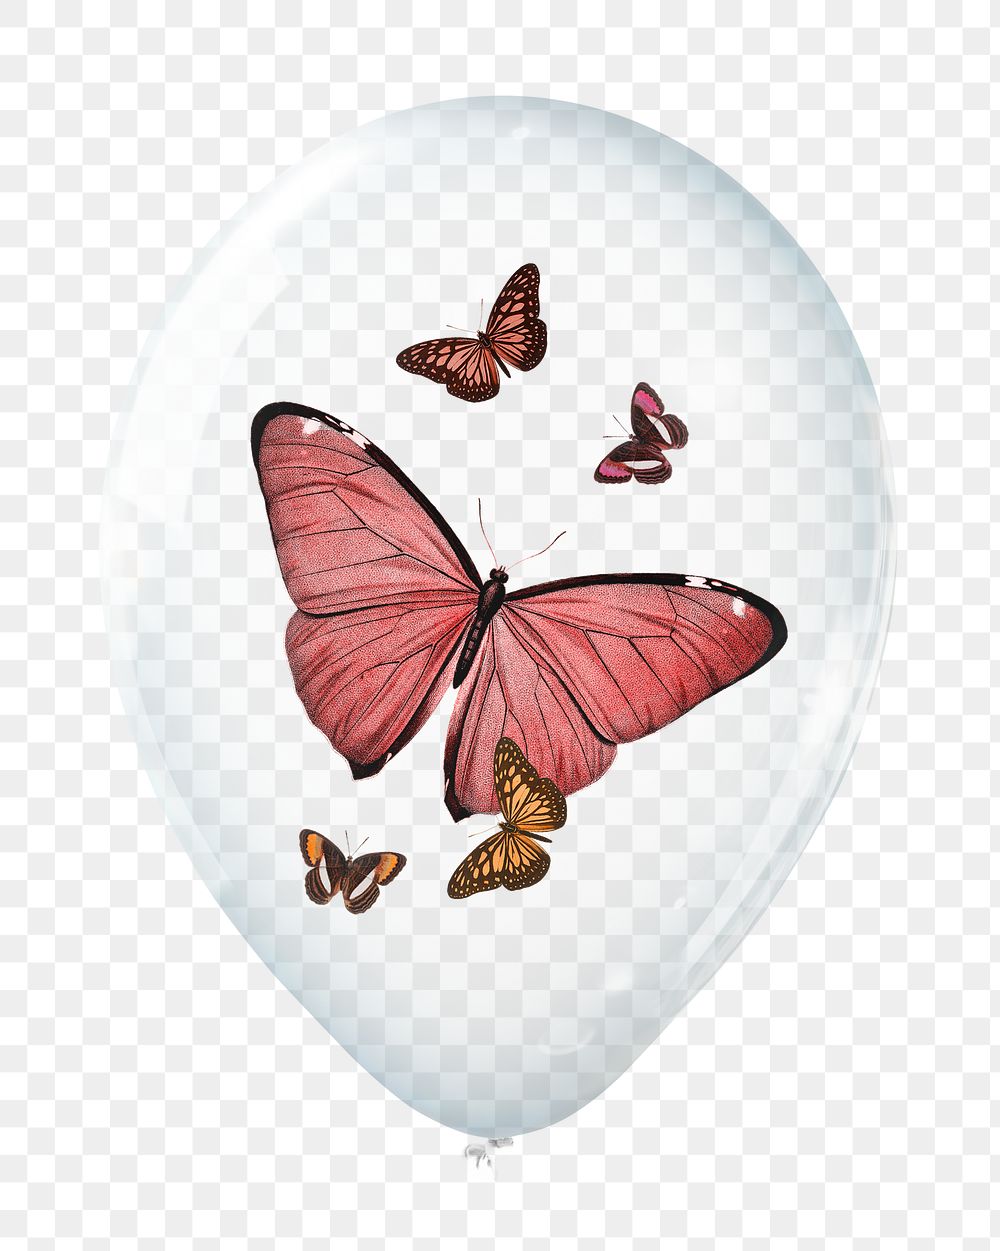 Butterflies png sticker, animal in clear balloon, transparent background